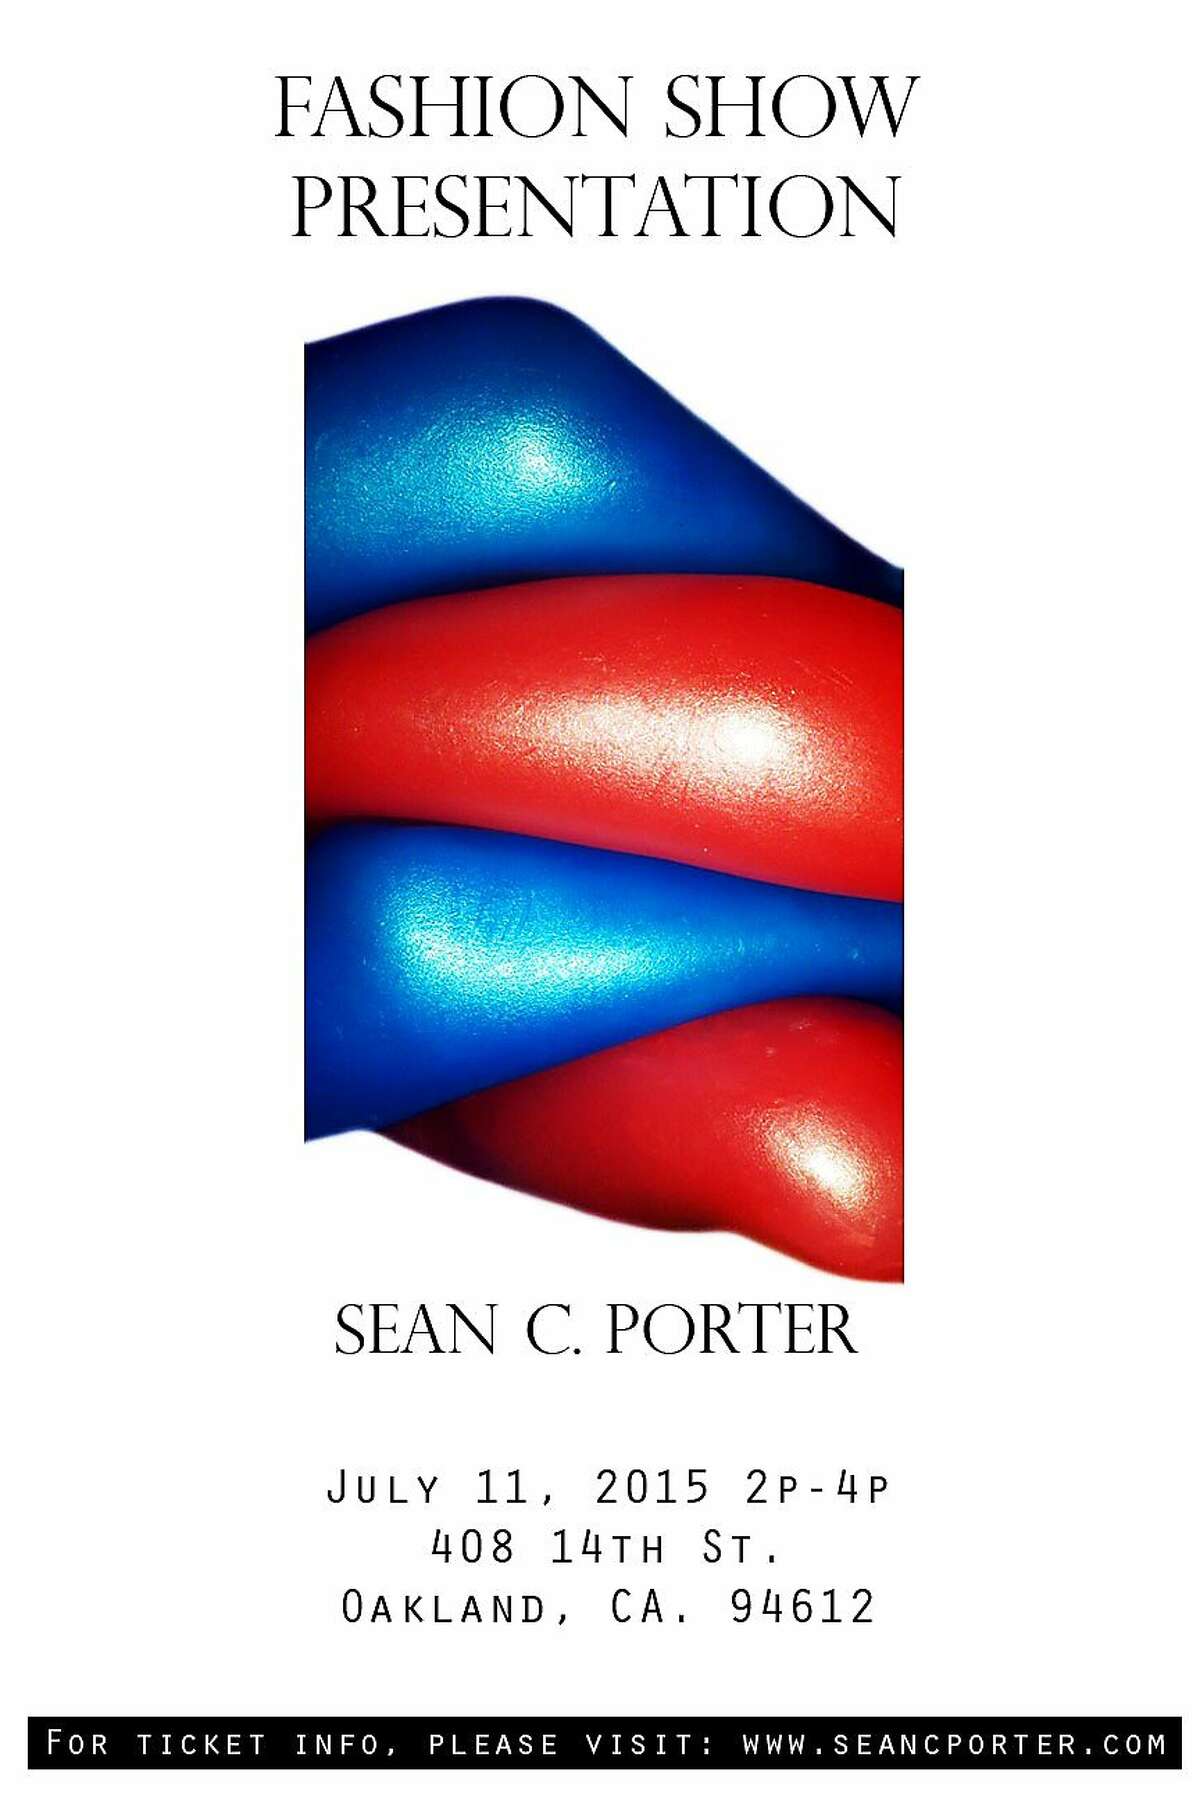 Creator of the b'ART dress, Sean C. Porter releases his all new fall/winter 2015-2016 collection for women on July 11.